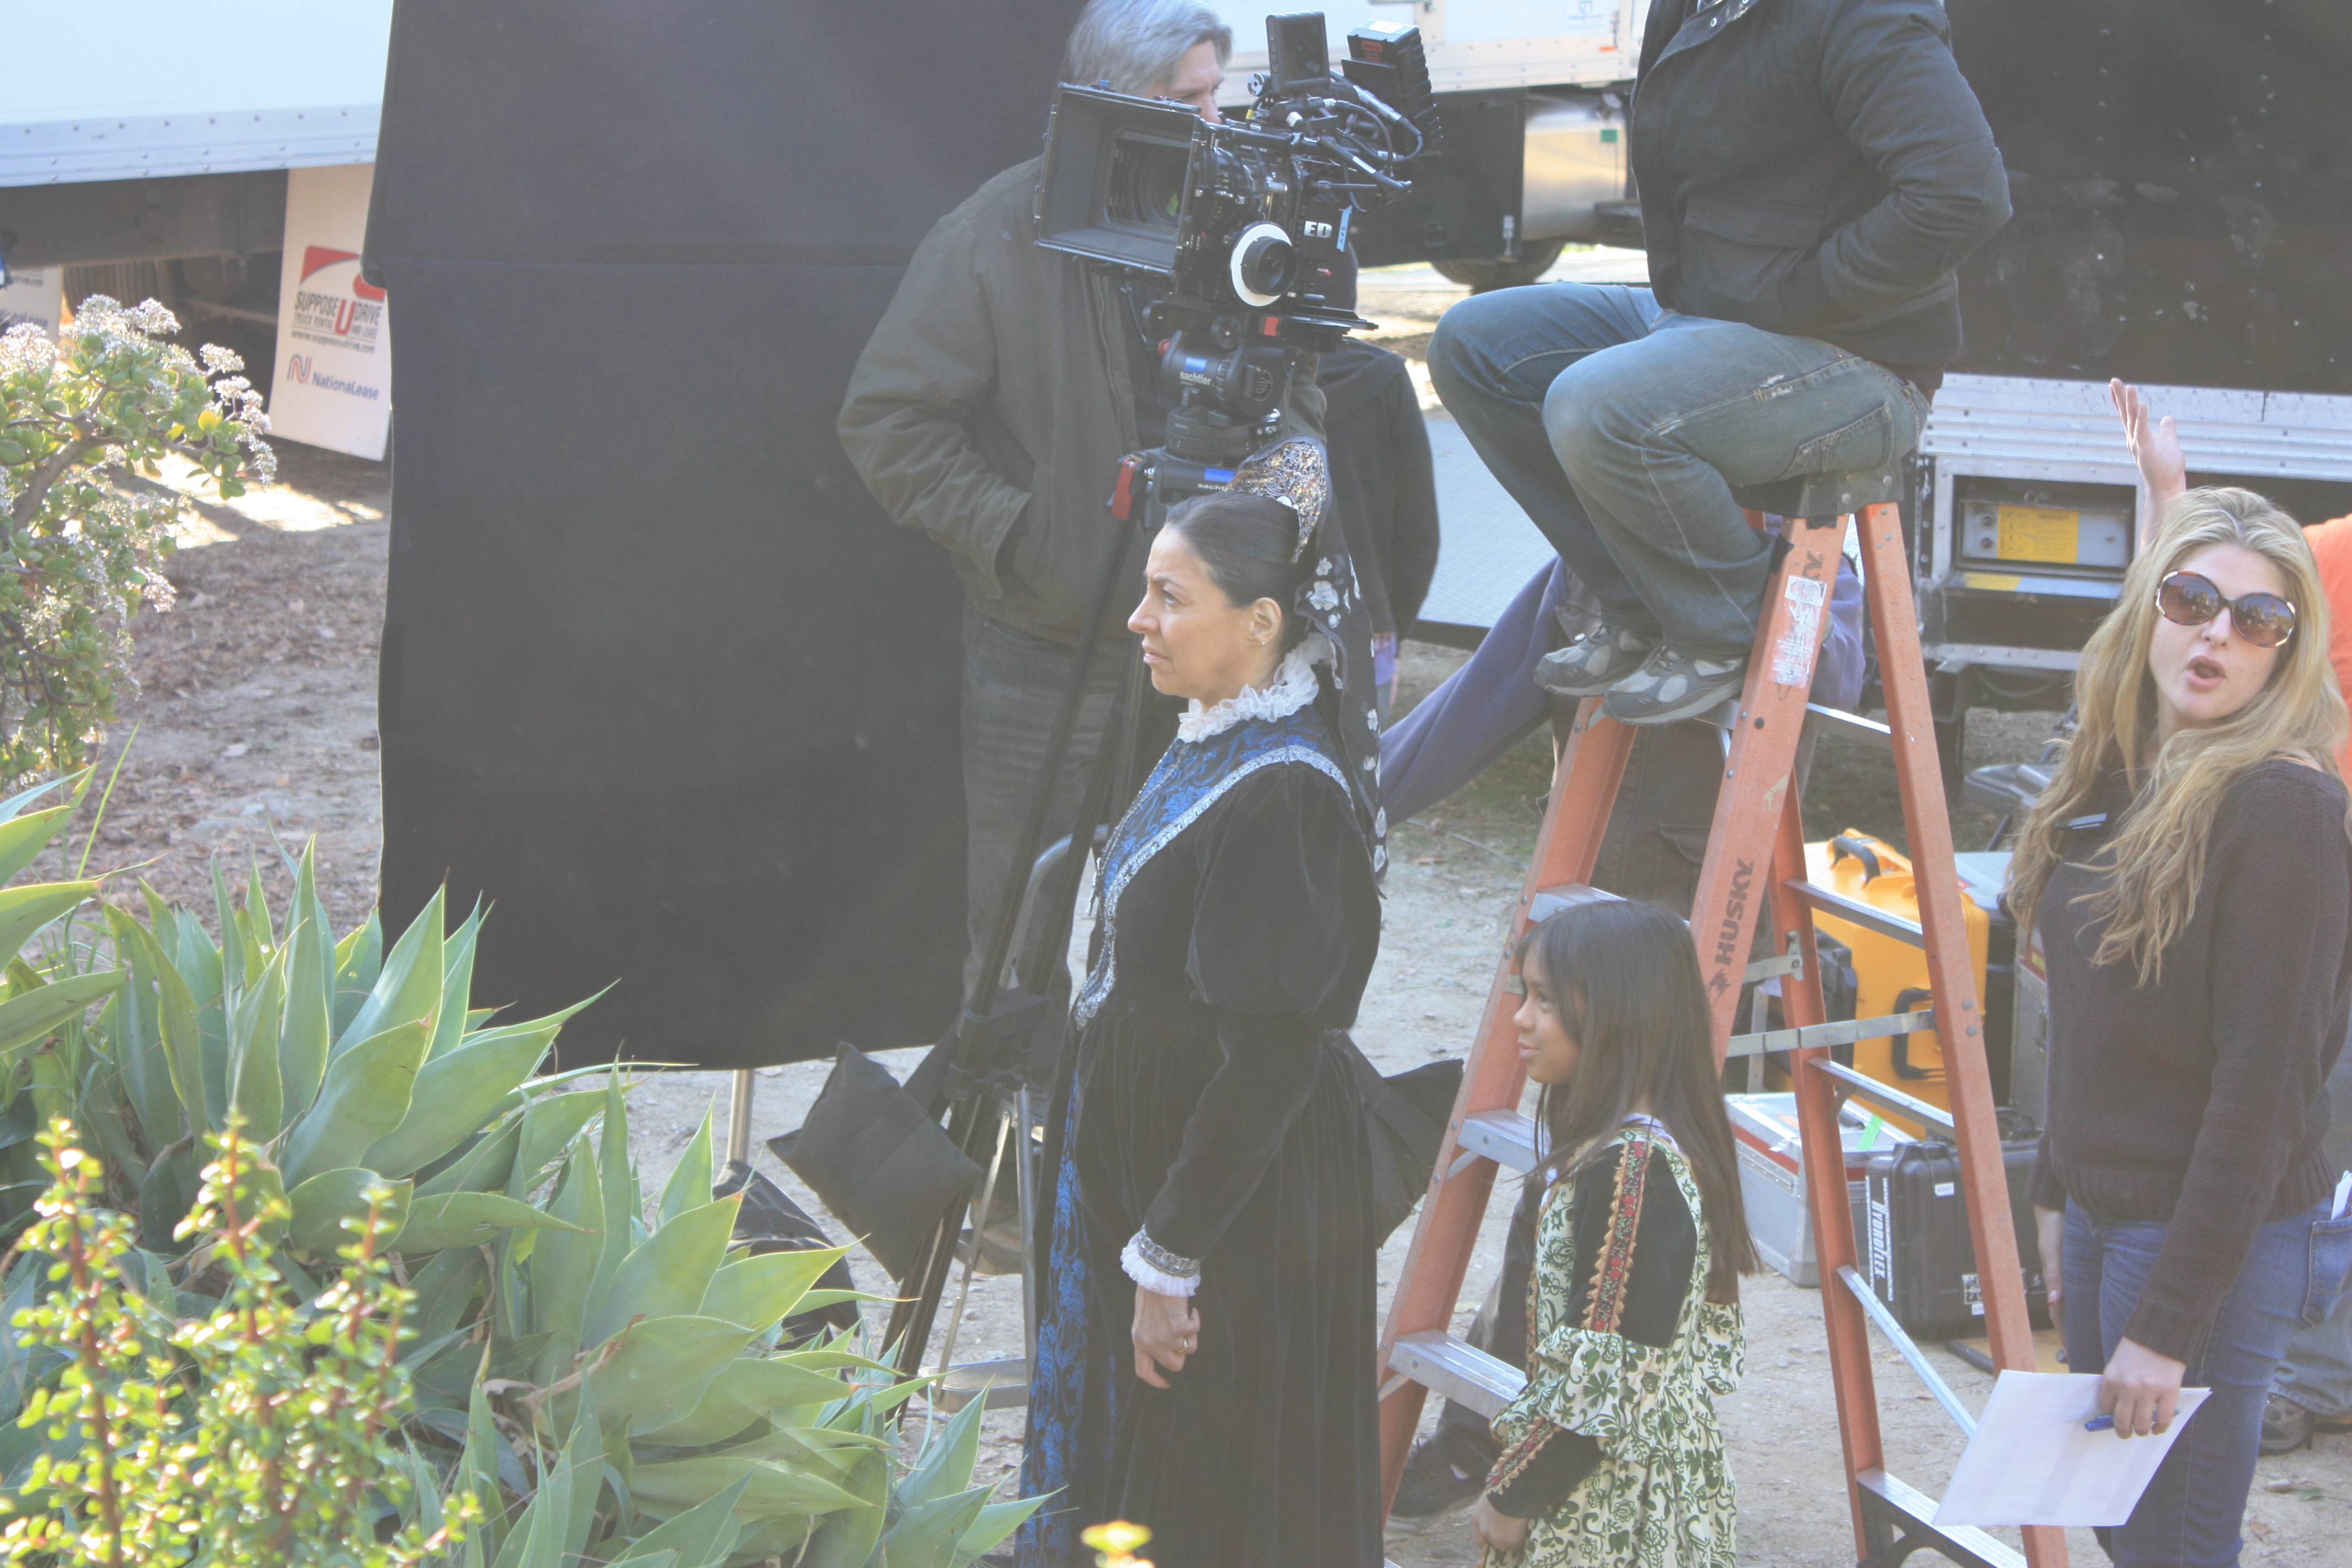 Maile on set filming the Exquisite Tenderness of Santa Rosa de Lima